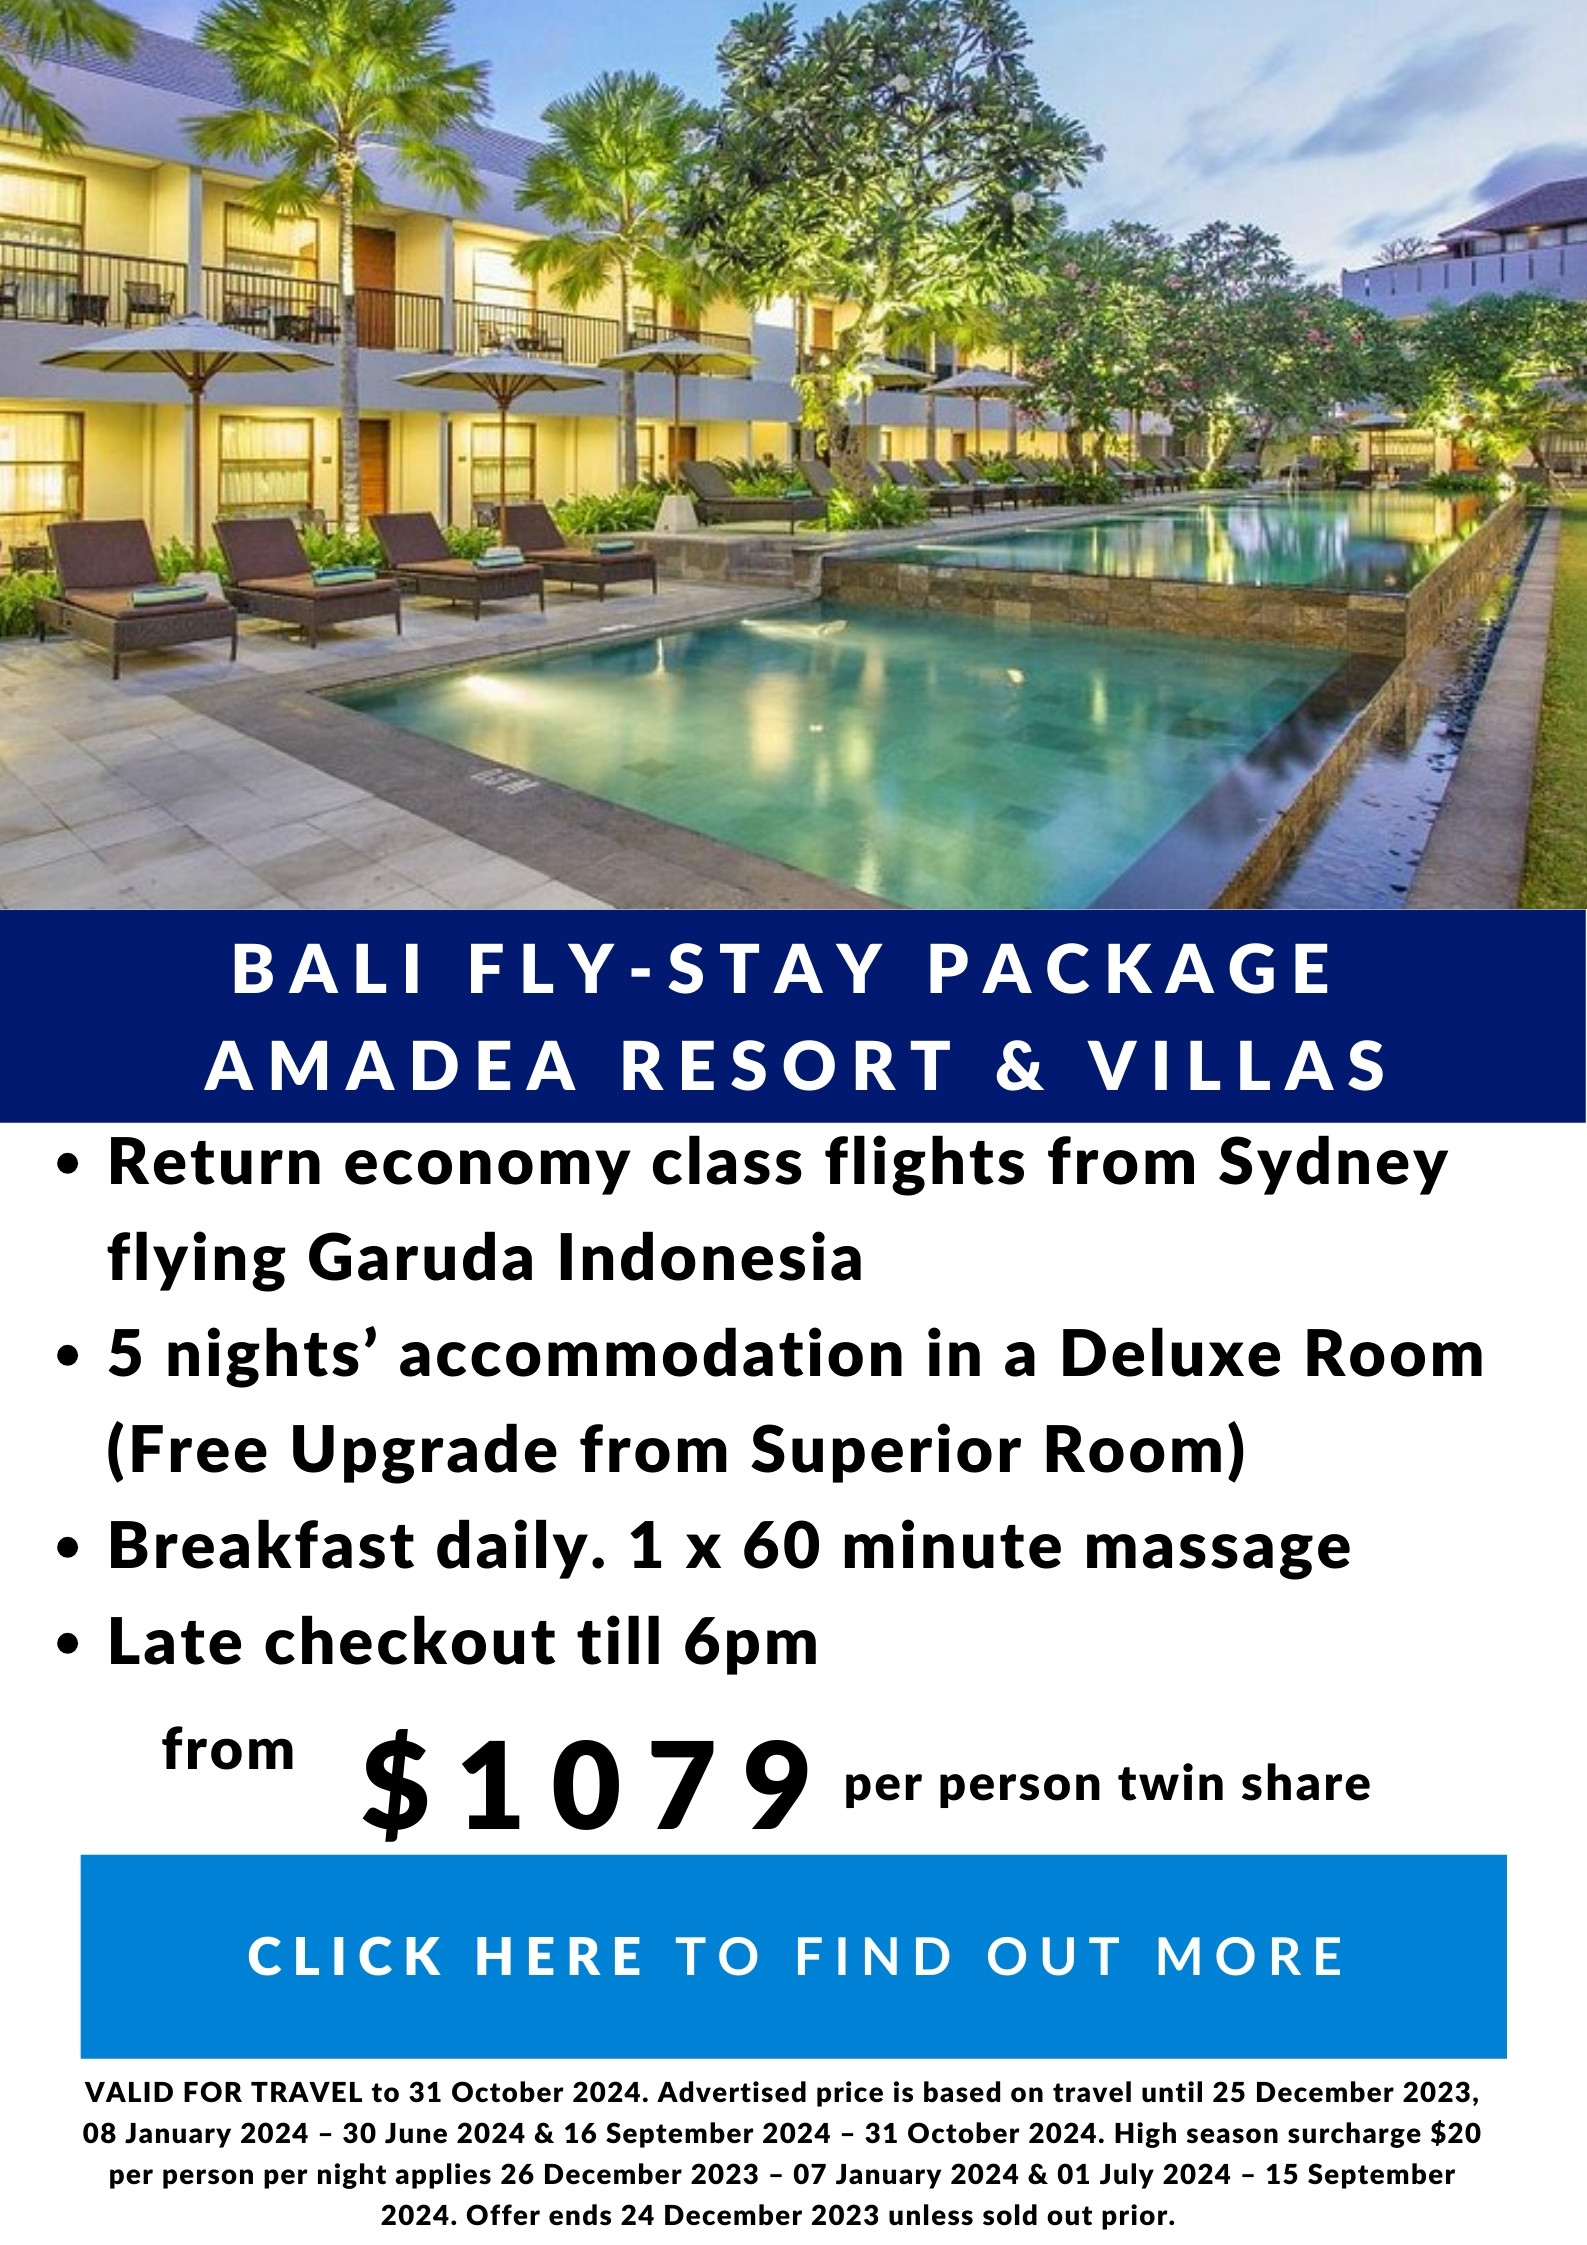 From $1079 per person twin share